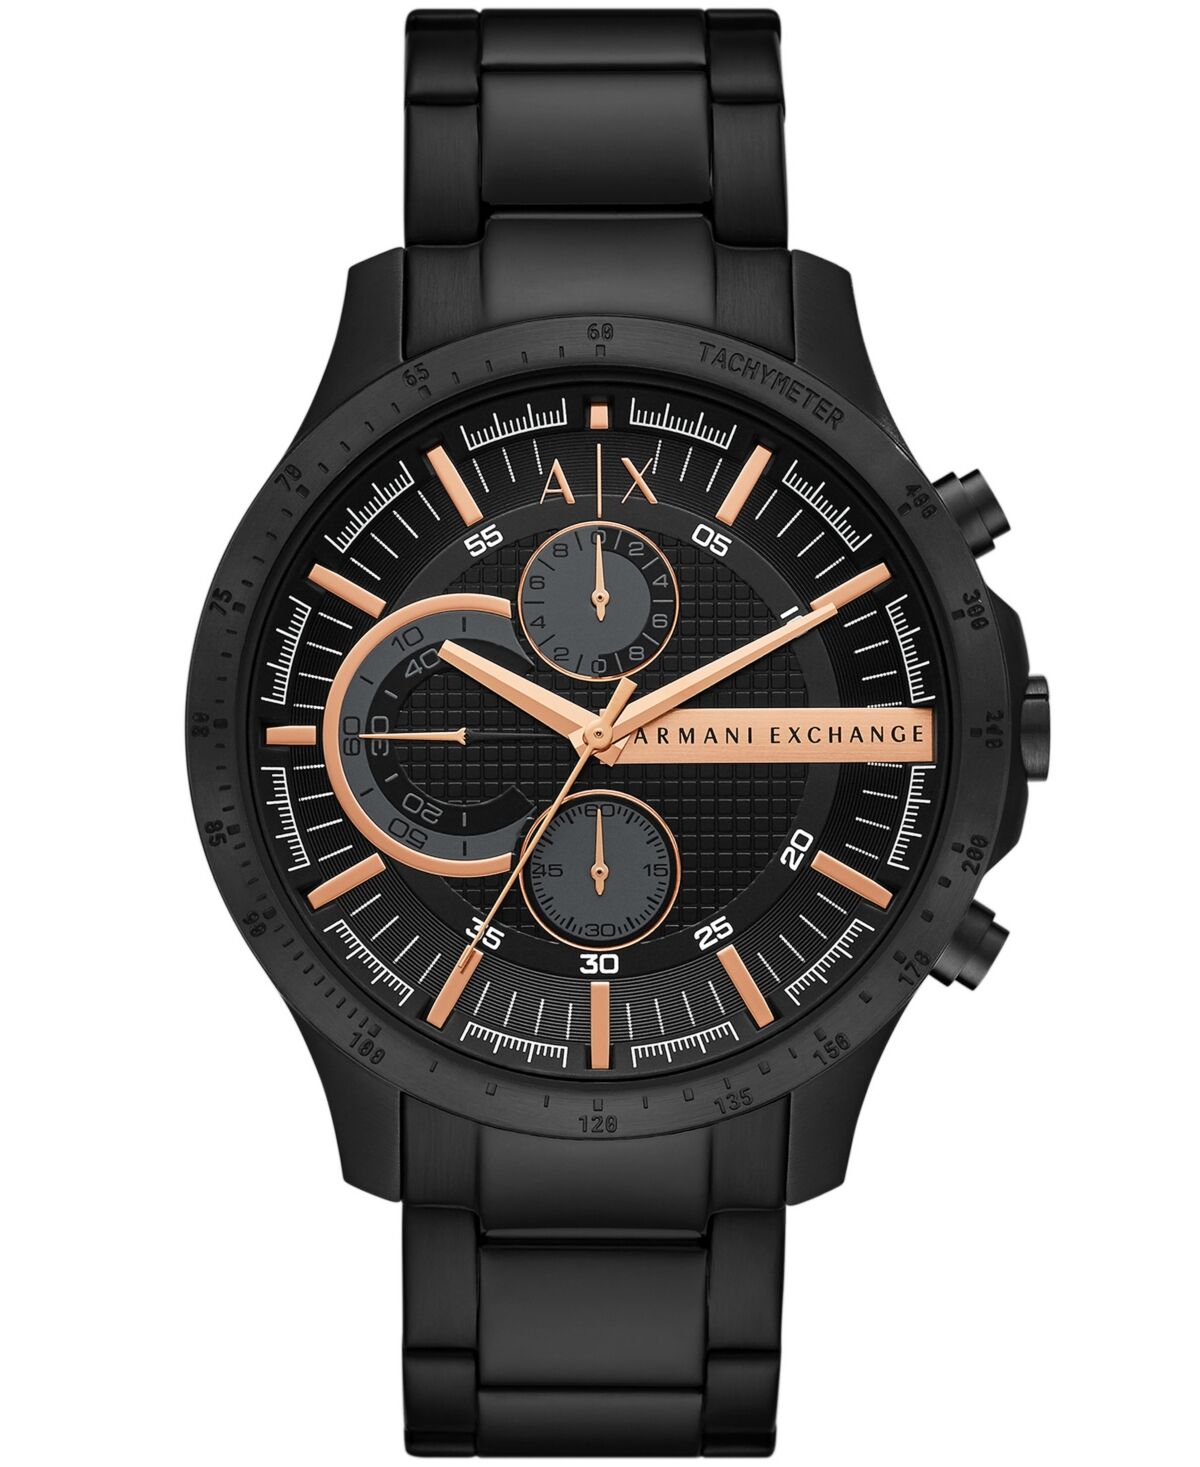 A|x Armani Exchange Men's Chronograph in Black Plated Stainless Steel Bracelet Watch 46mm - Black